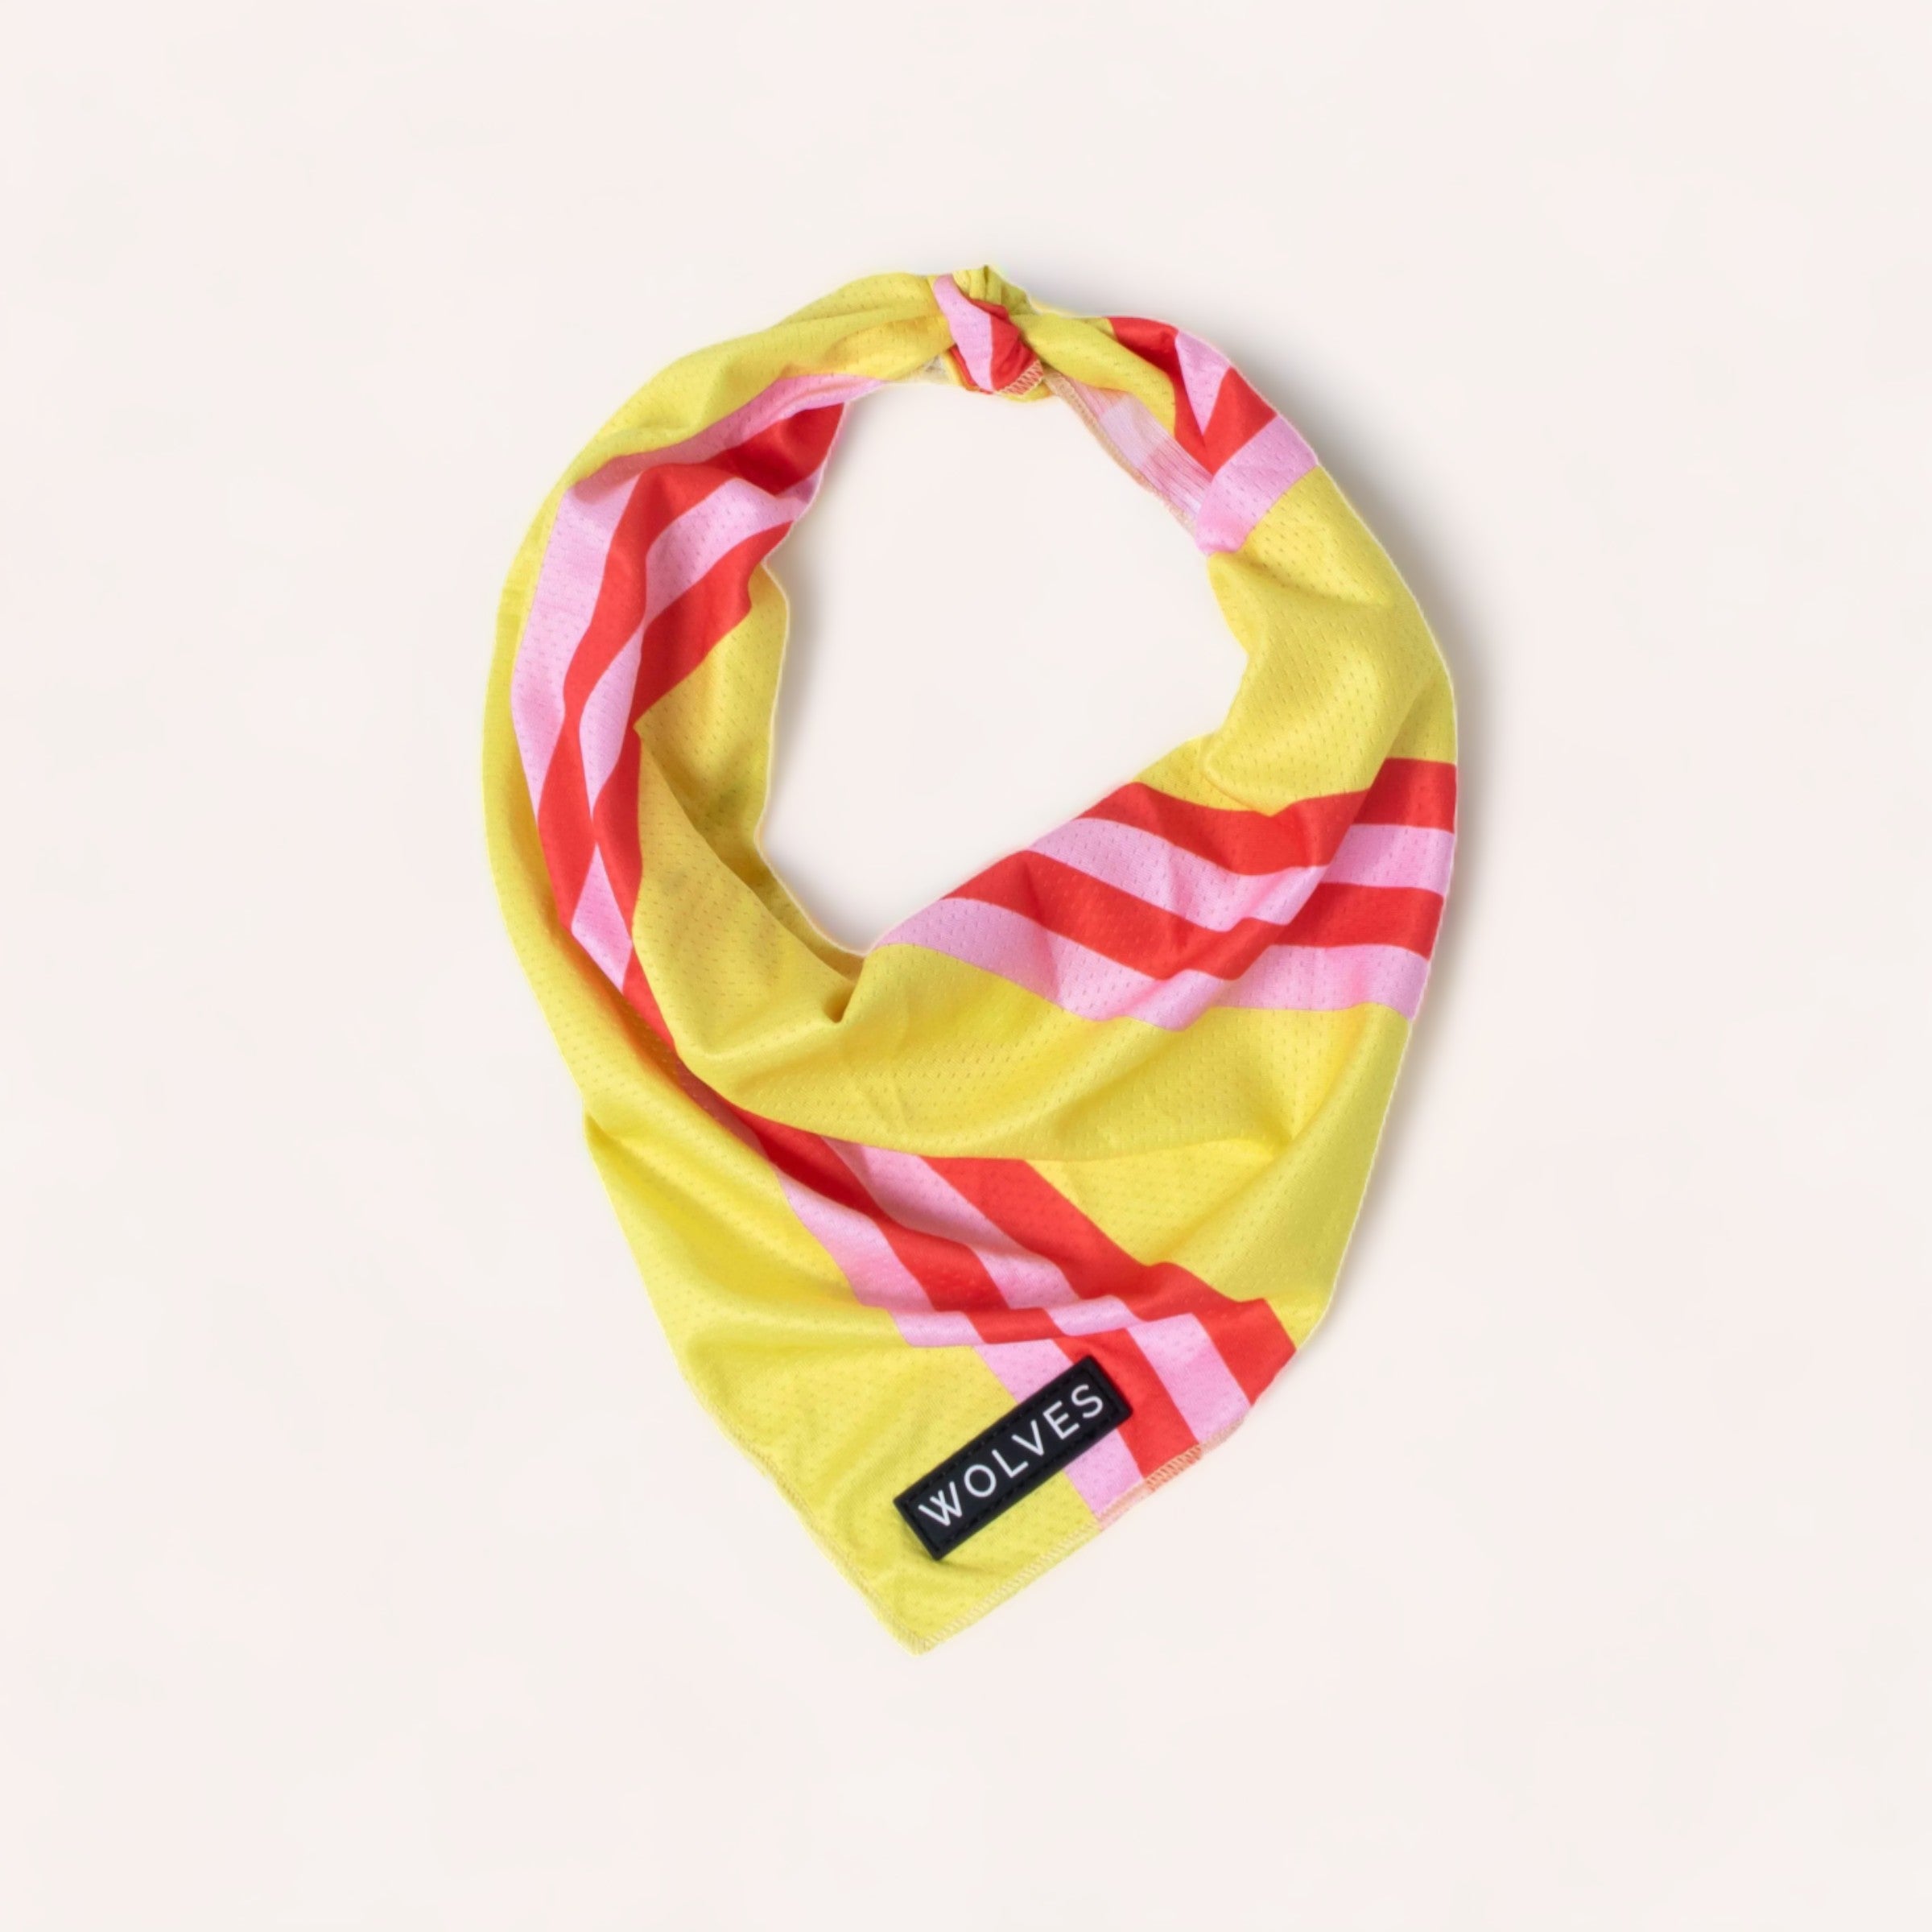 A vibrant yellow and pink striped wrinkle-free Penny Bandana by Wolves of Wellington with the word "wolves" printed on one corner, neatly laid out on a white background.